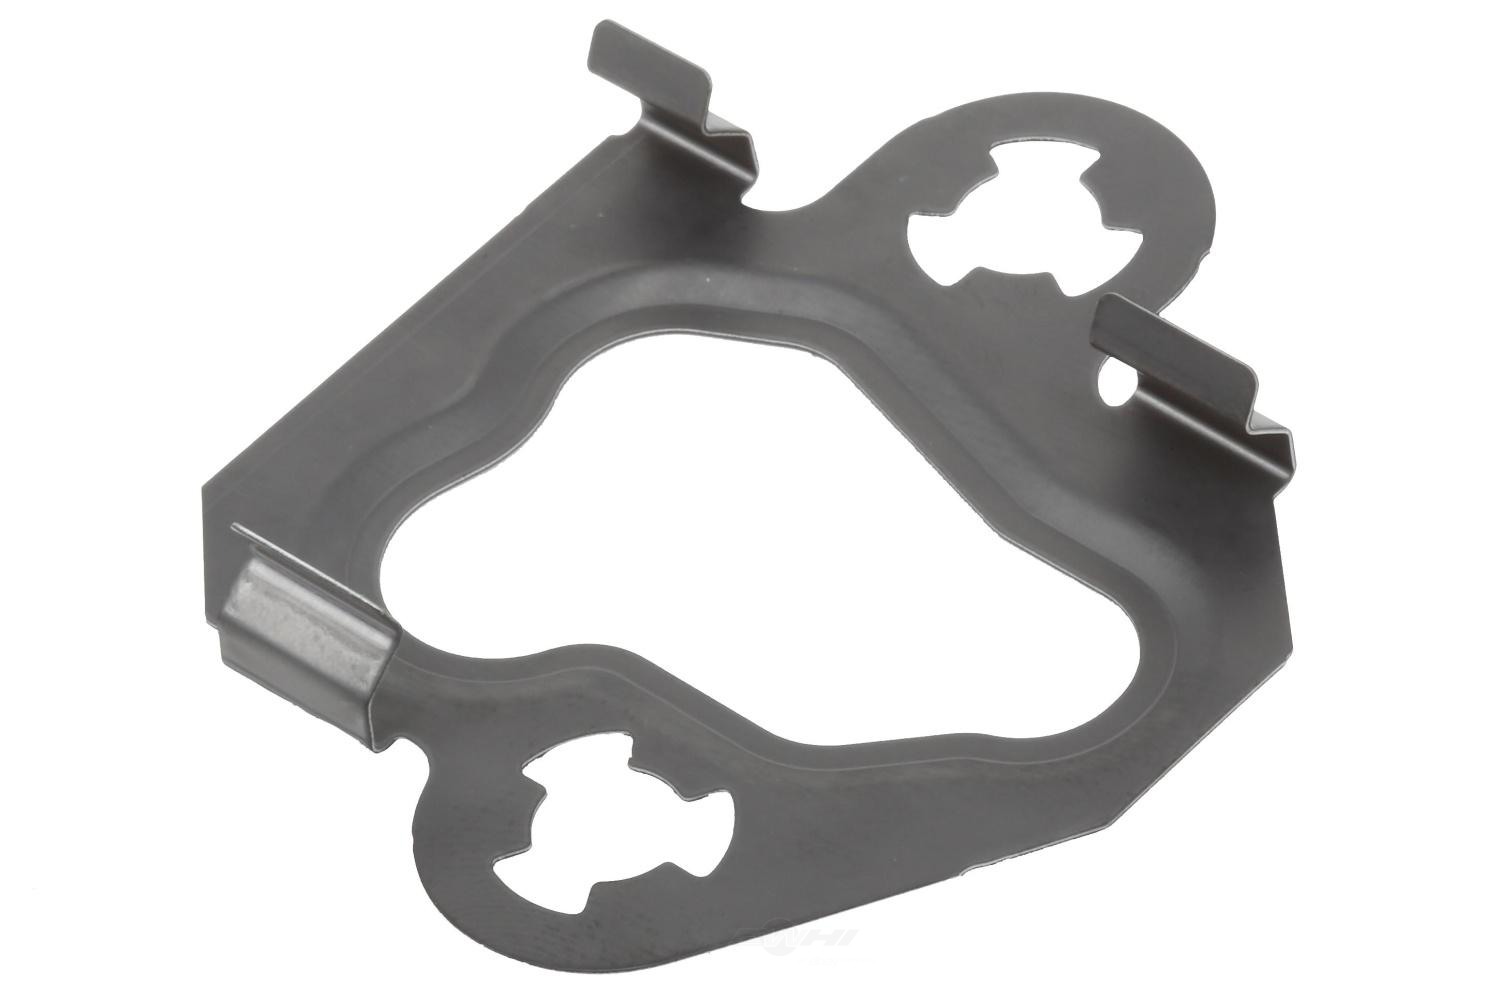 GM GENUINE PARTS - Engine Timing Chain Tensioner Gasket - GMP 12627110